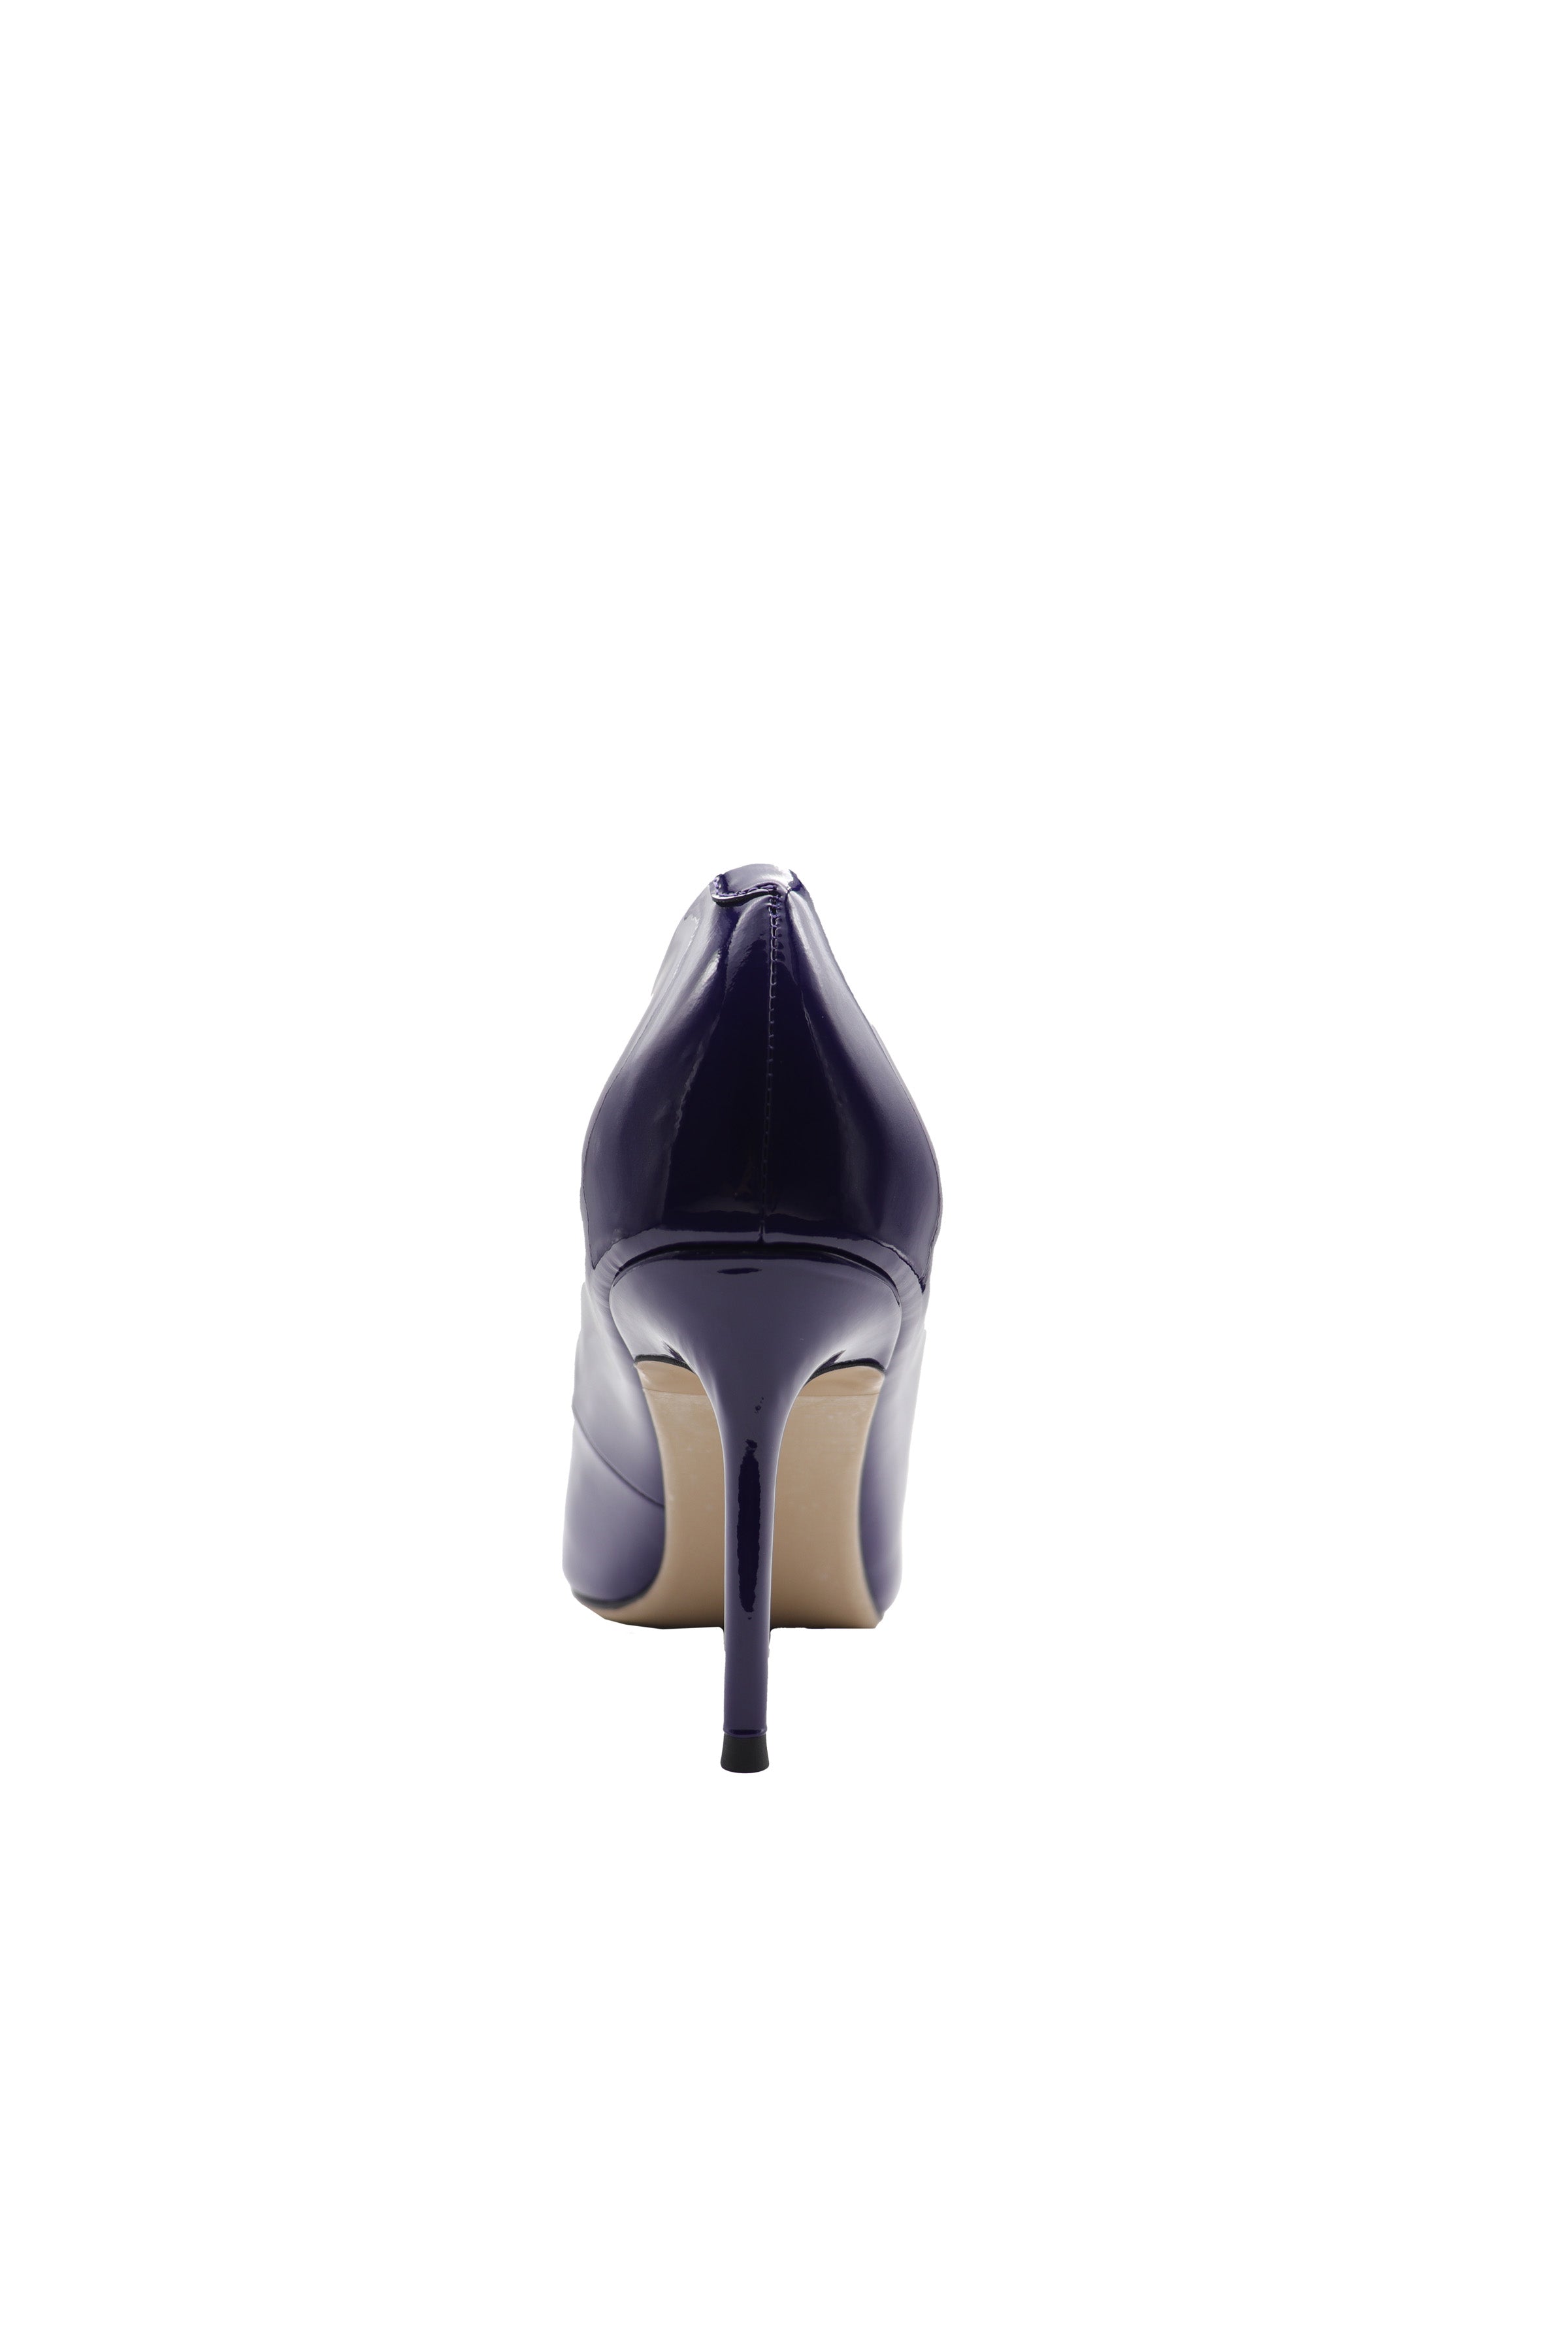 Bold and Vibrant: Purple Genuine Patent Leather Pointy Heels for Women